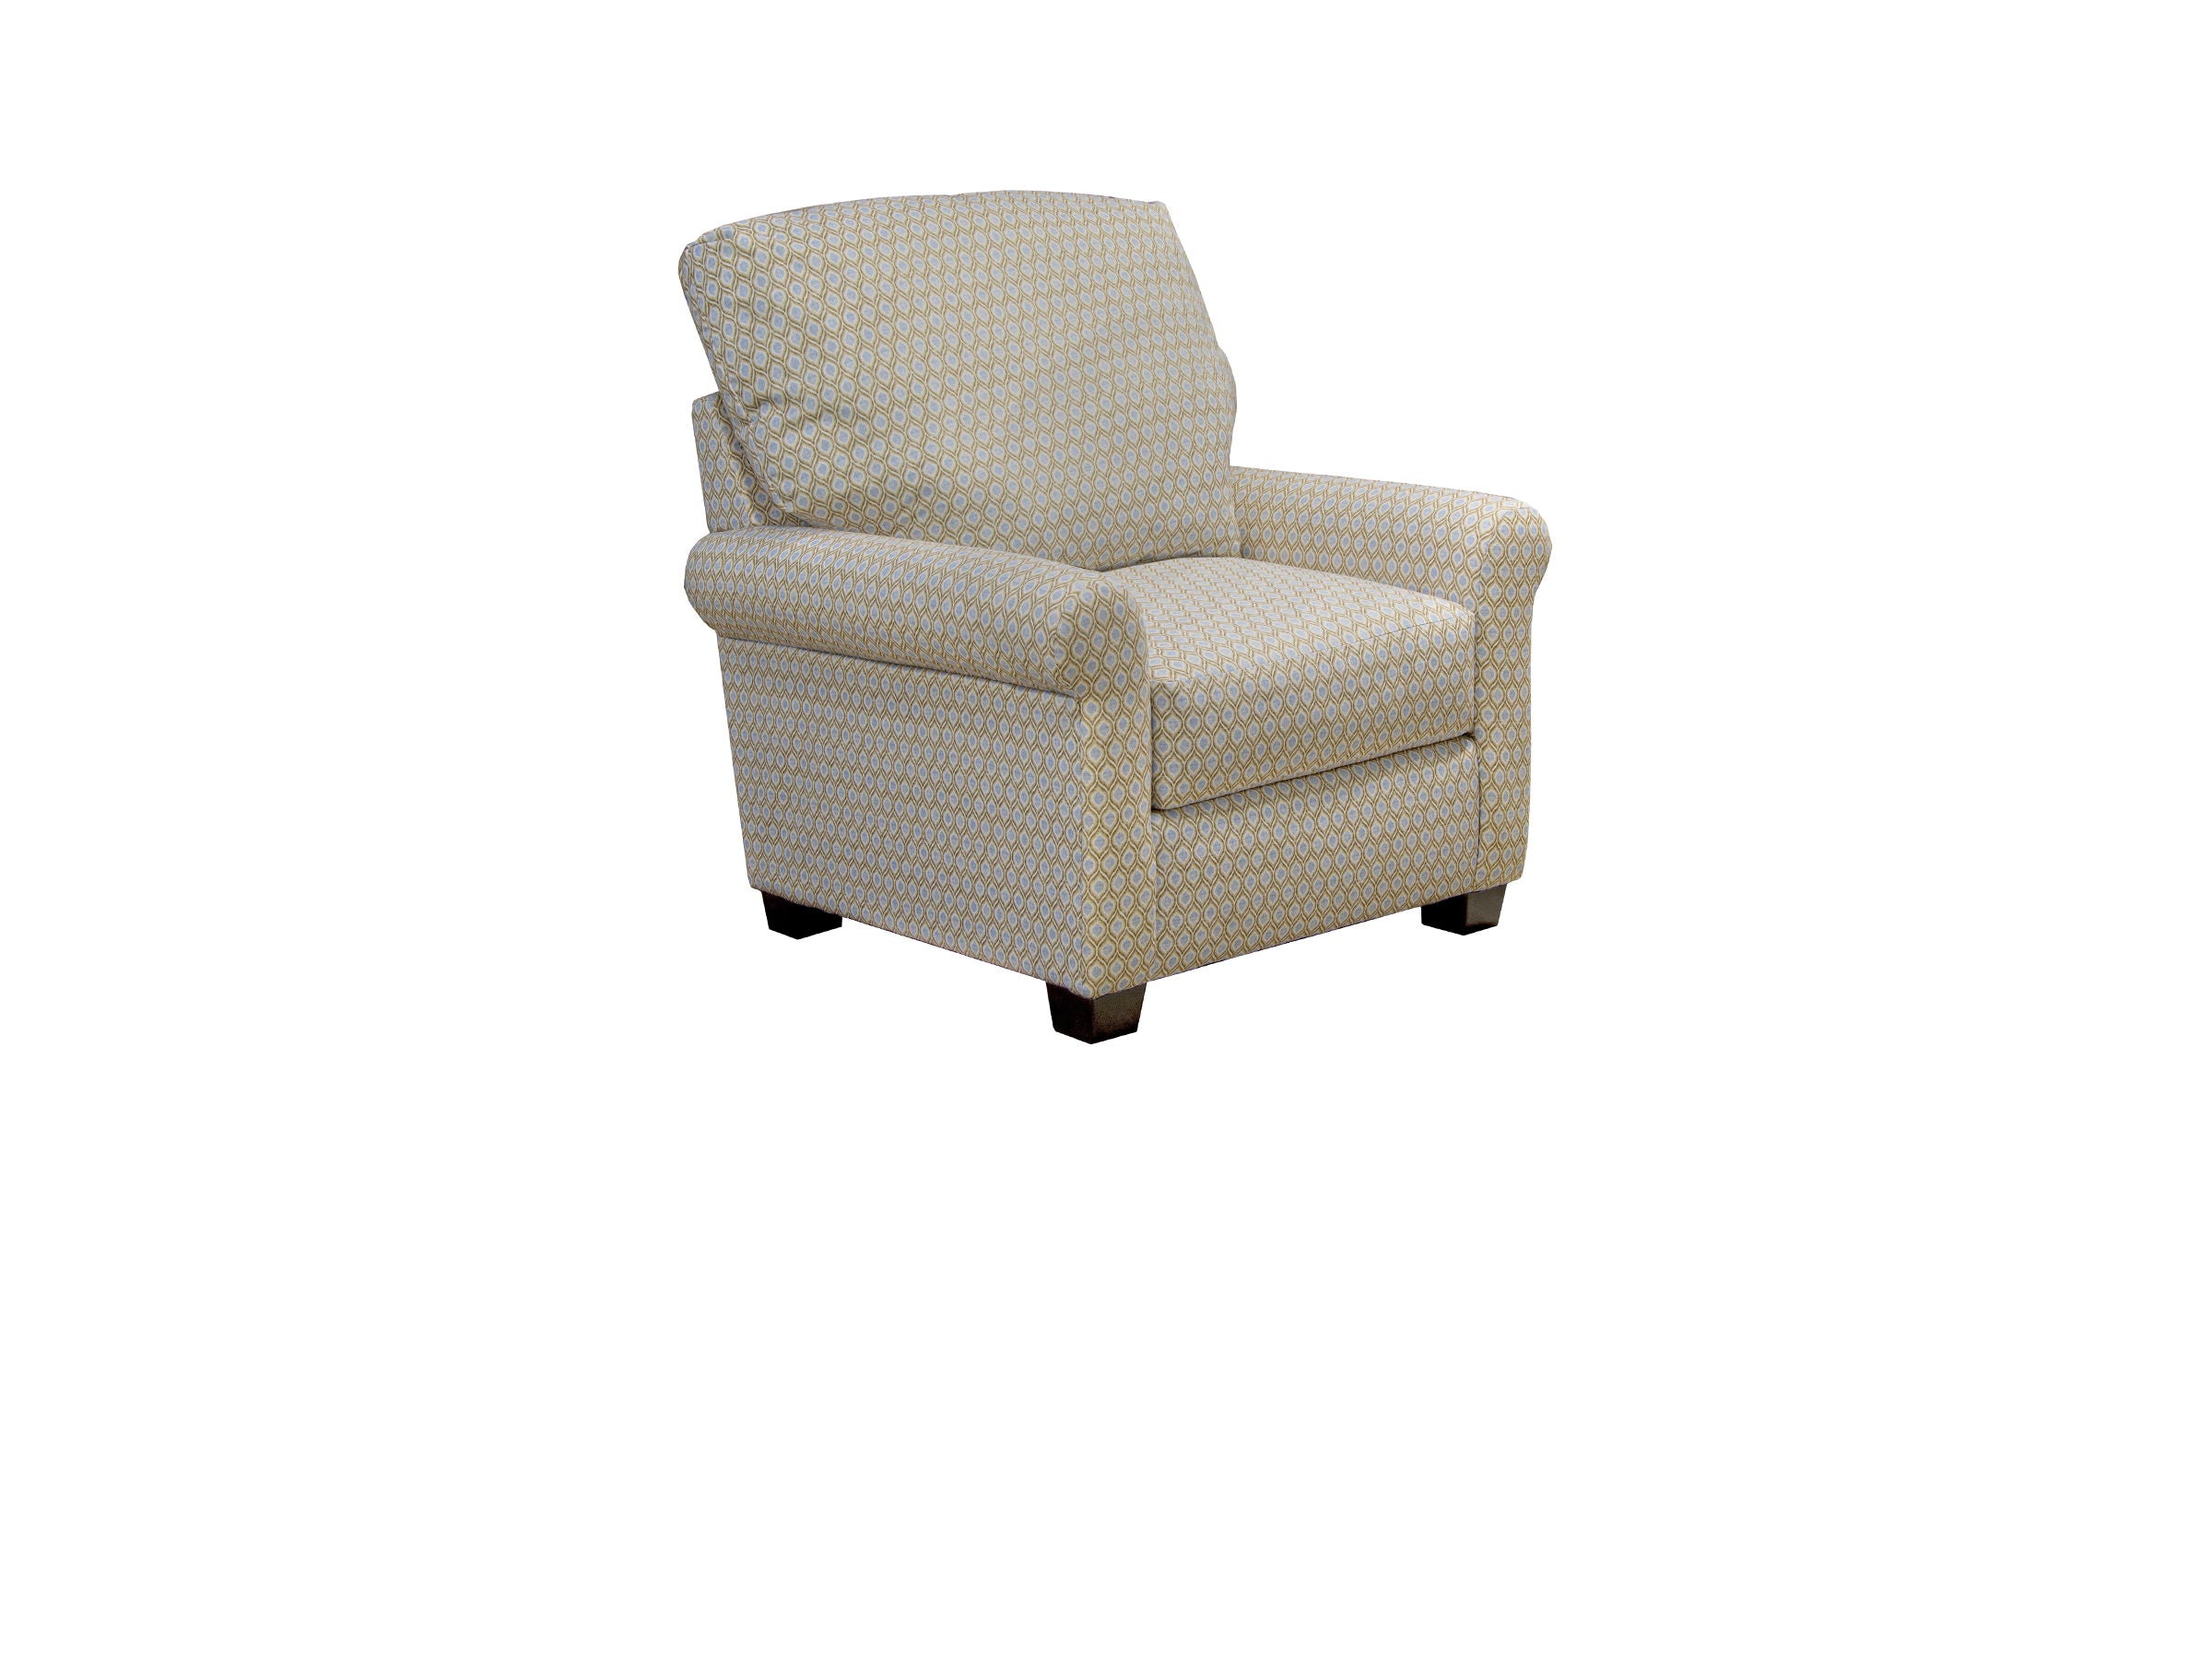 Magnolia - Accent Chair - Sky